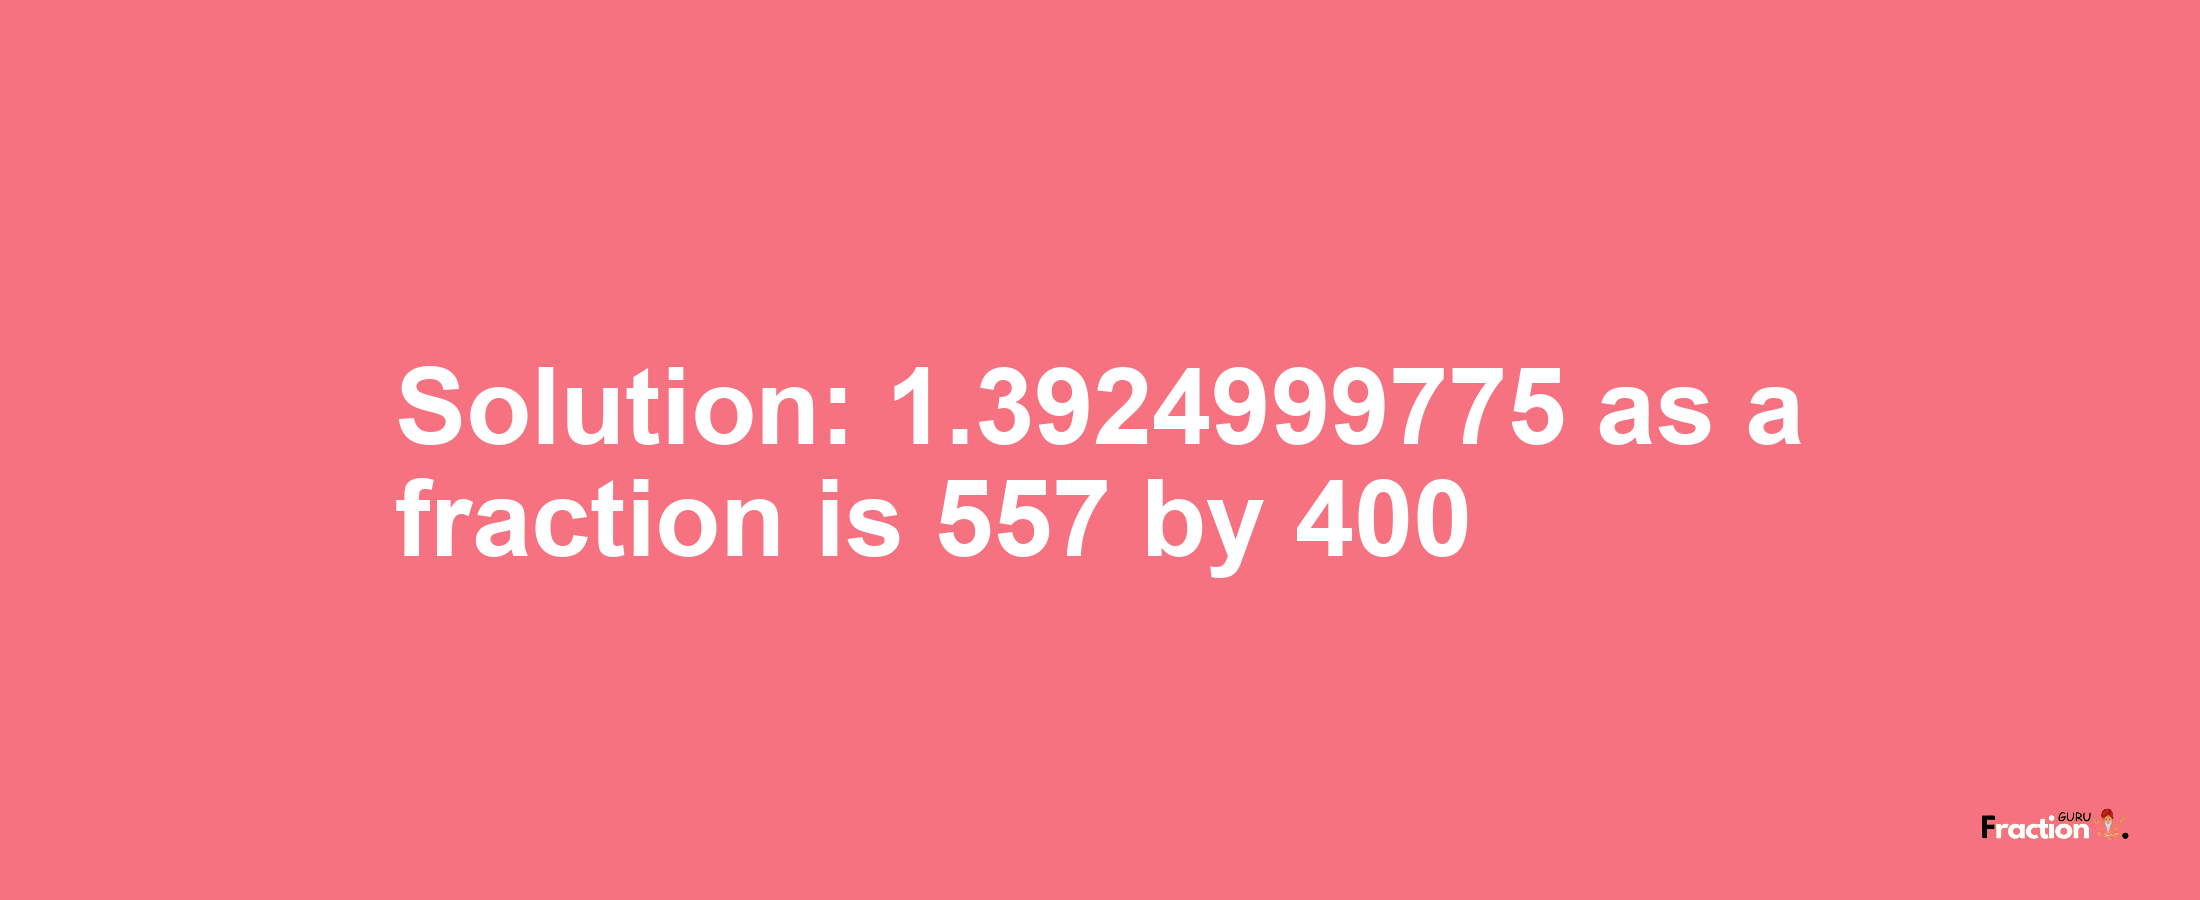 Solution:1.3924999775 as a fraction is 557/400